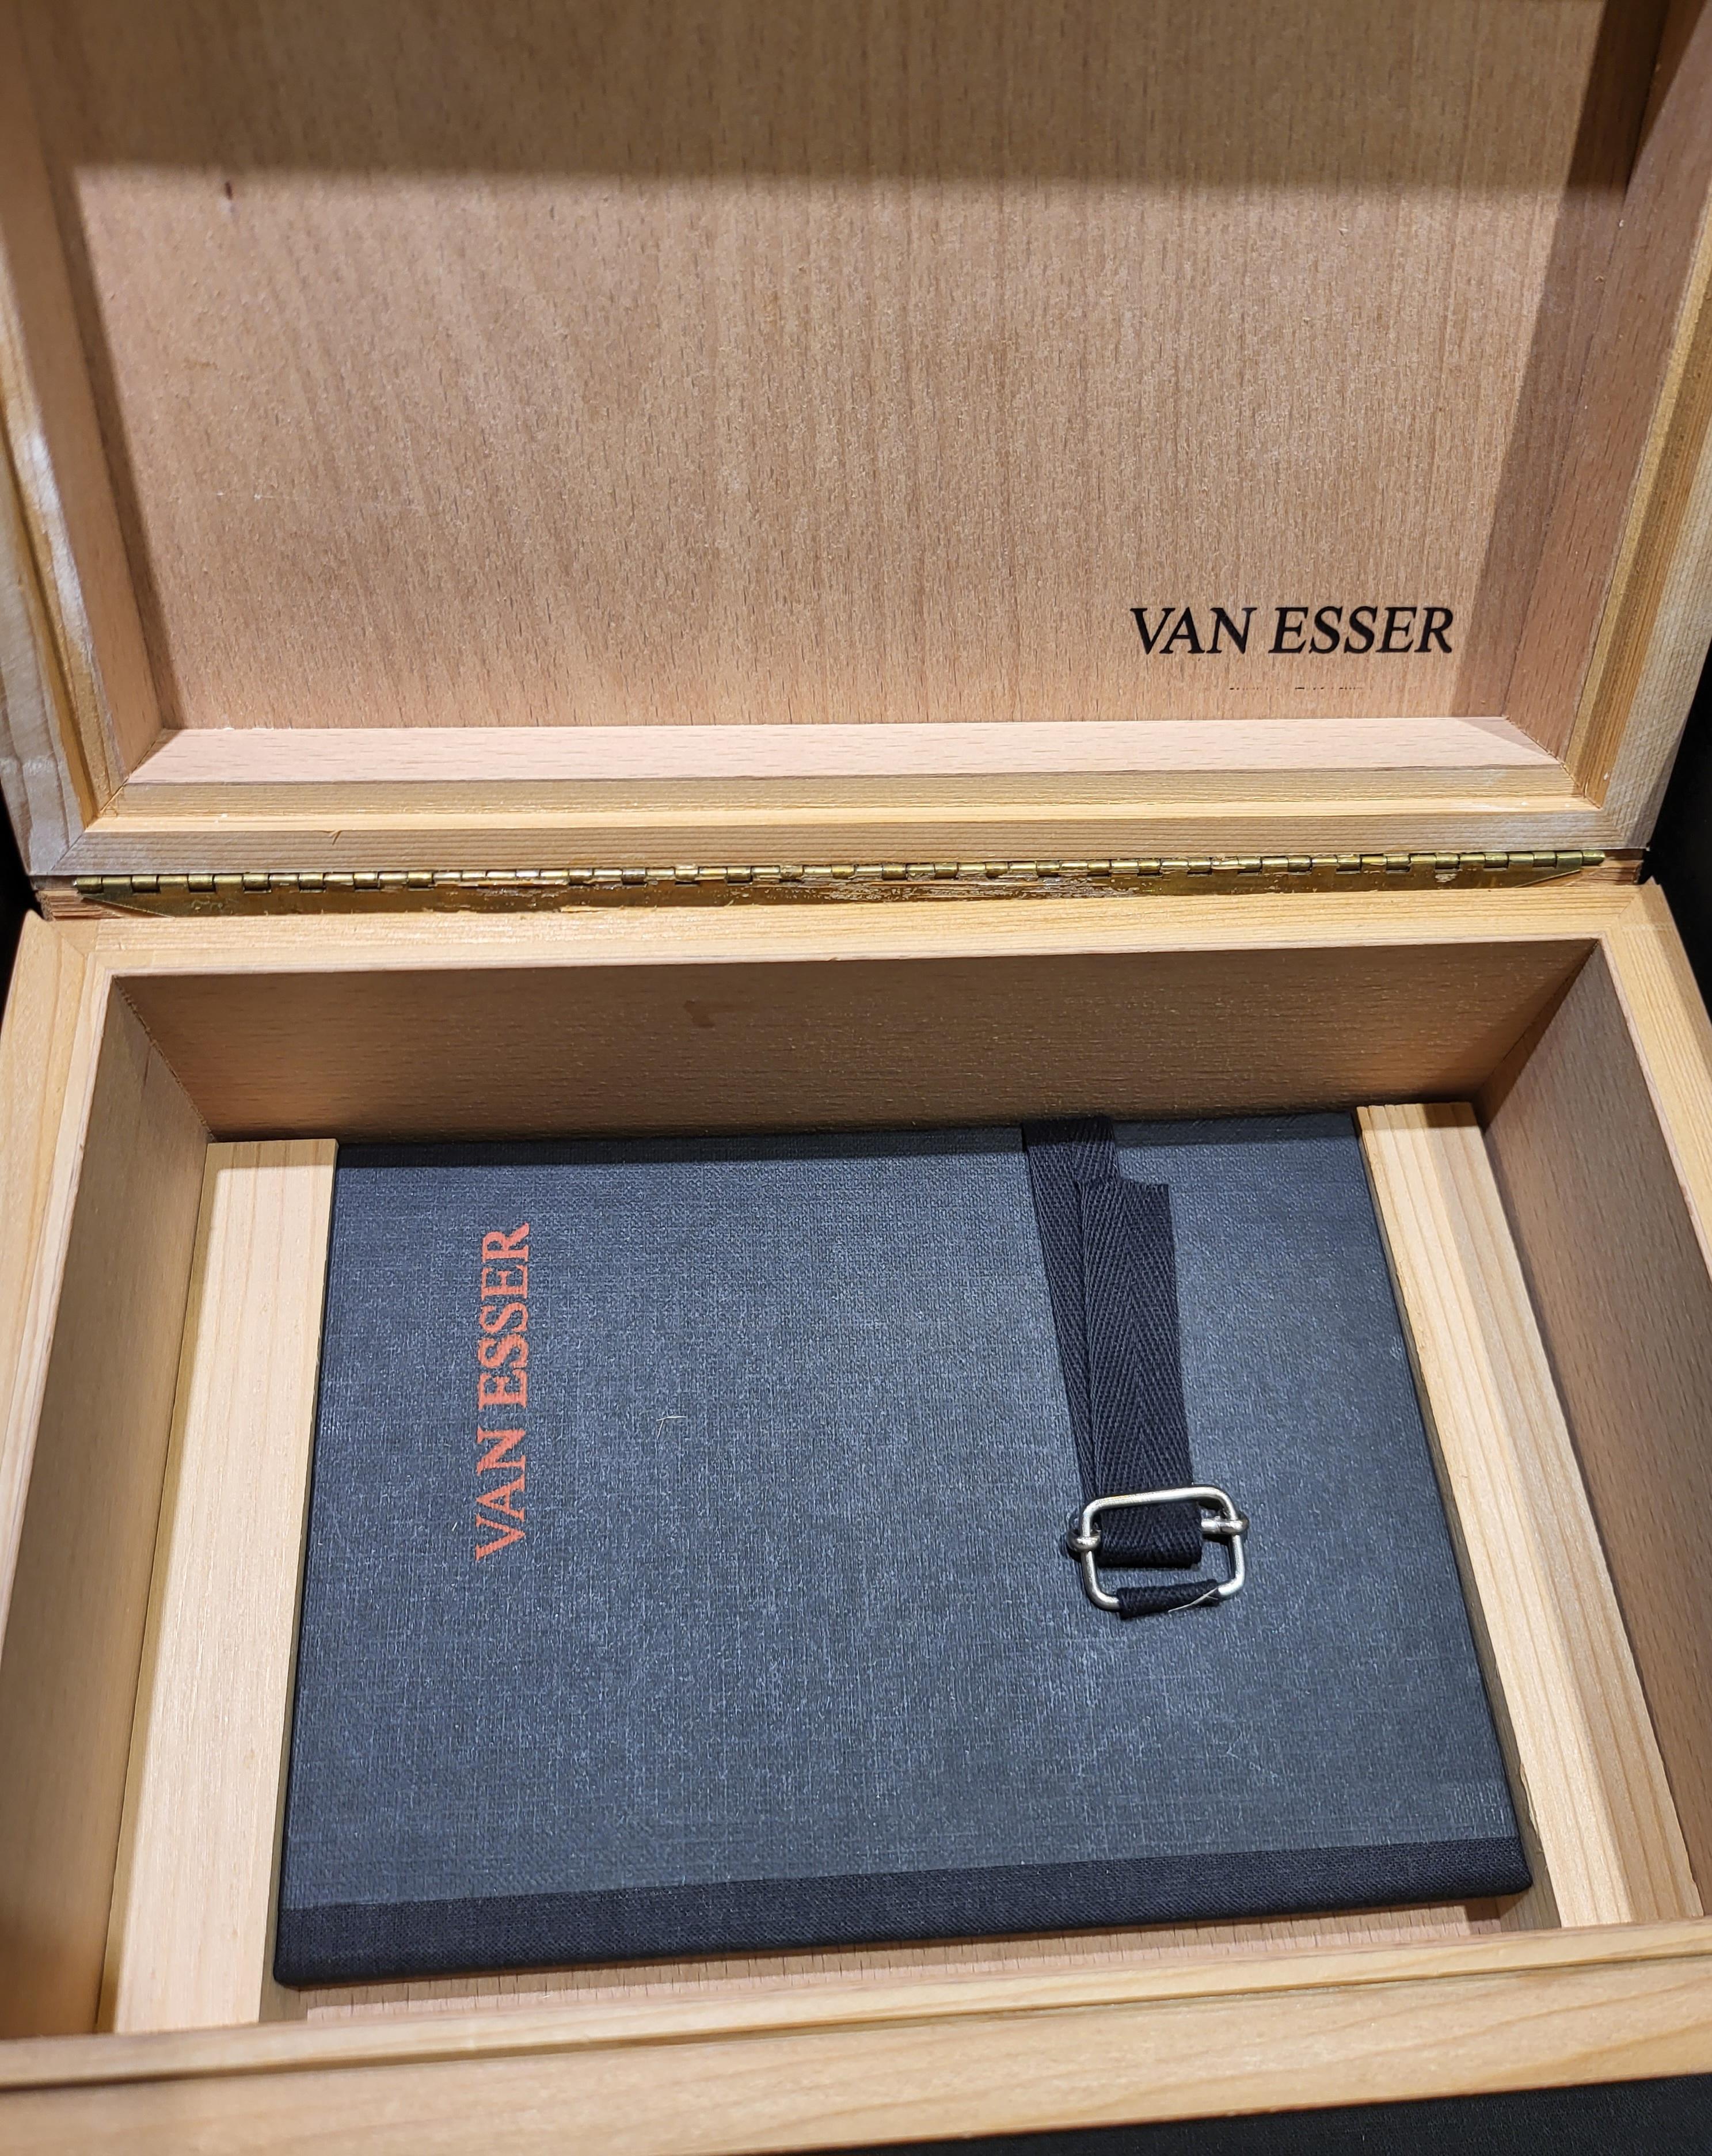 Artisan Van Esser a One Wrist Watch 18 Karat Gold, like New with Box & Papers For Sale